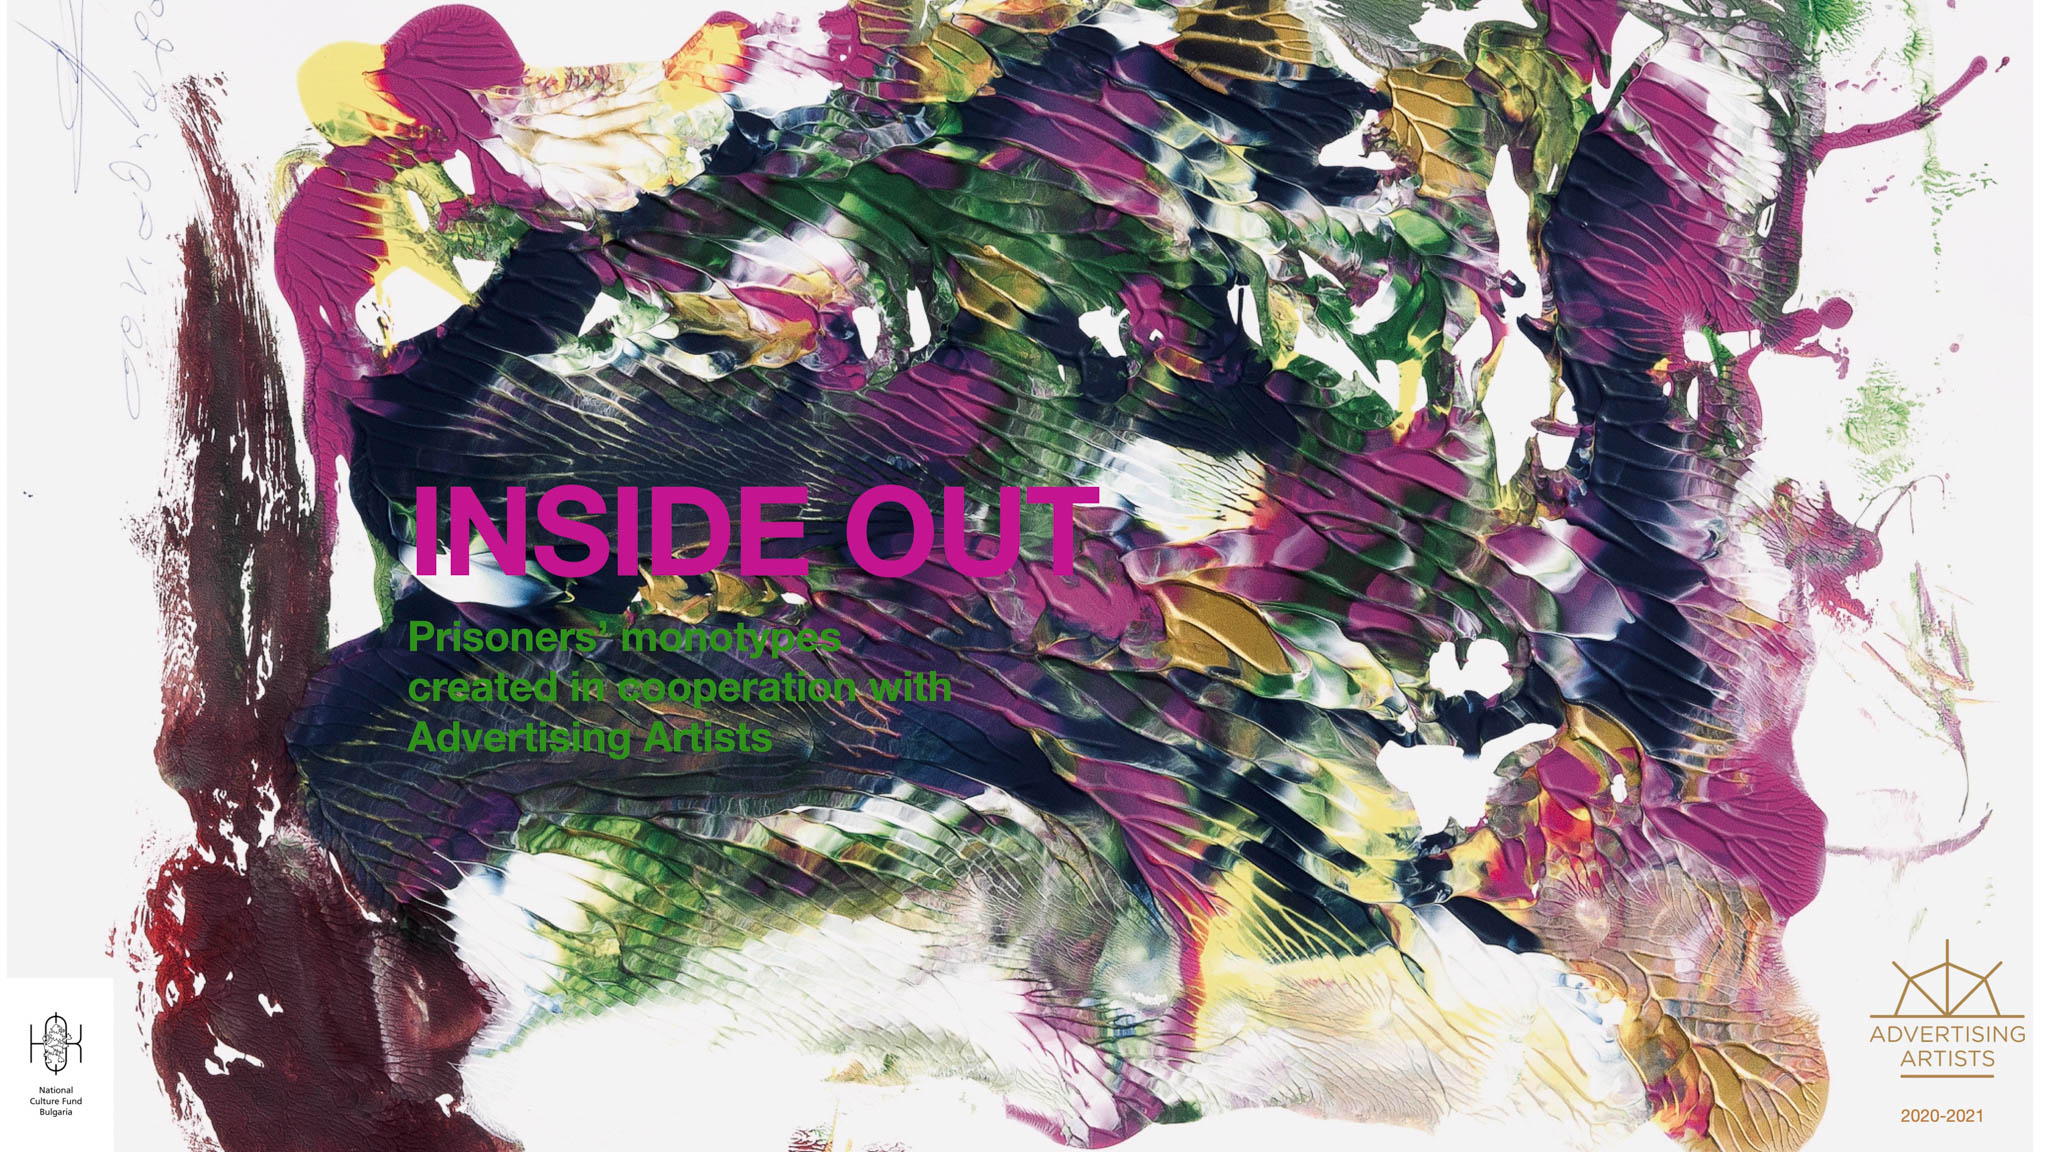 INSIDE OUT